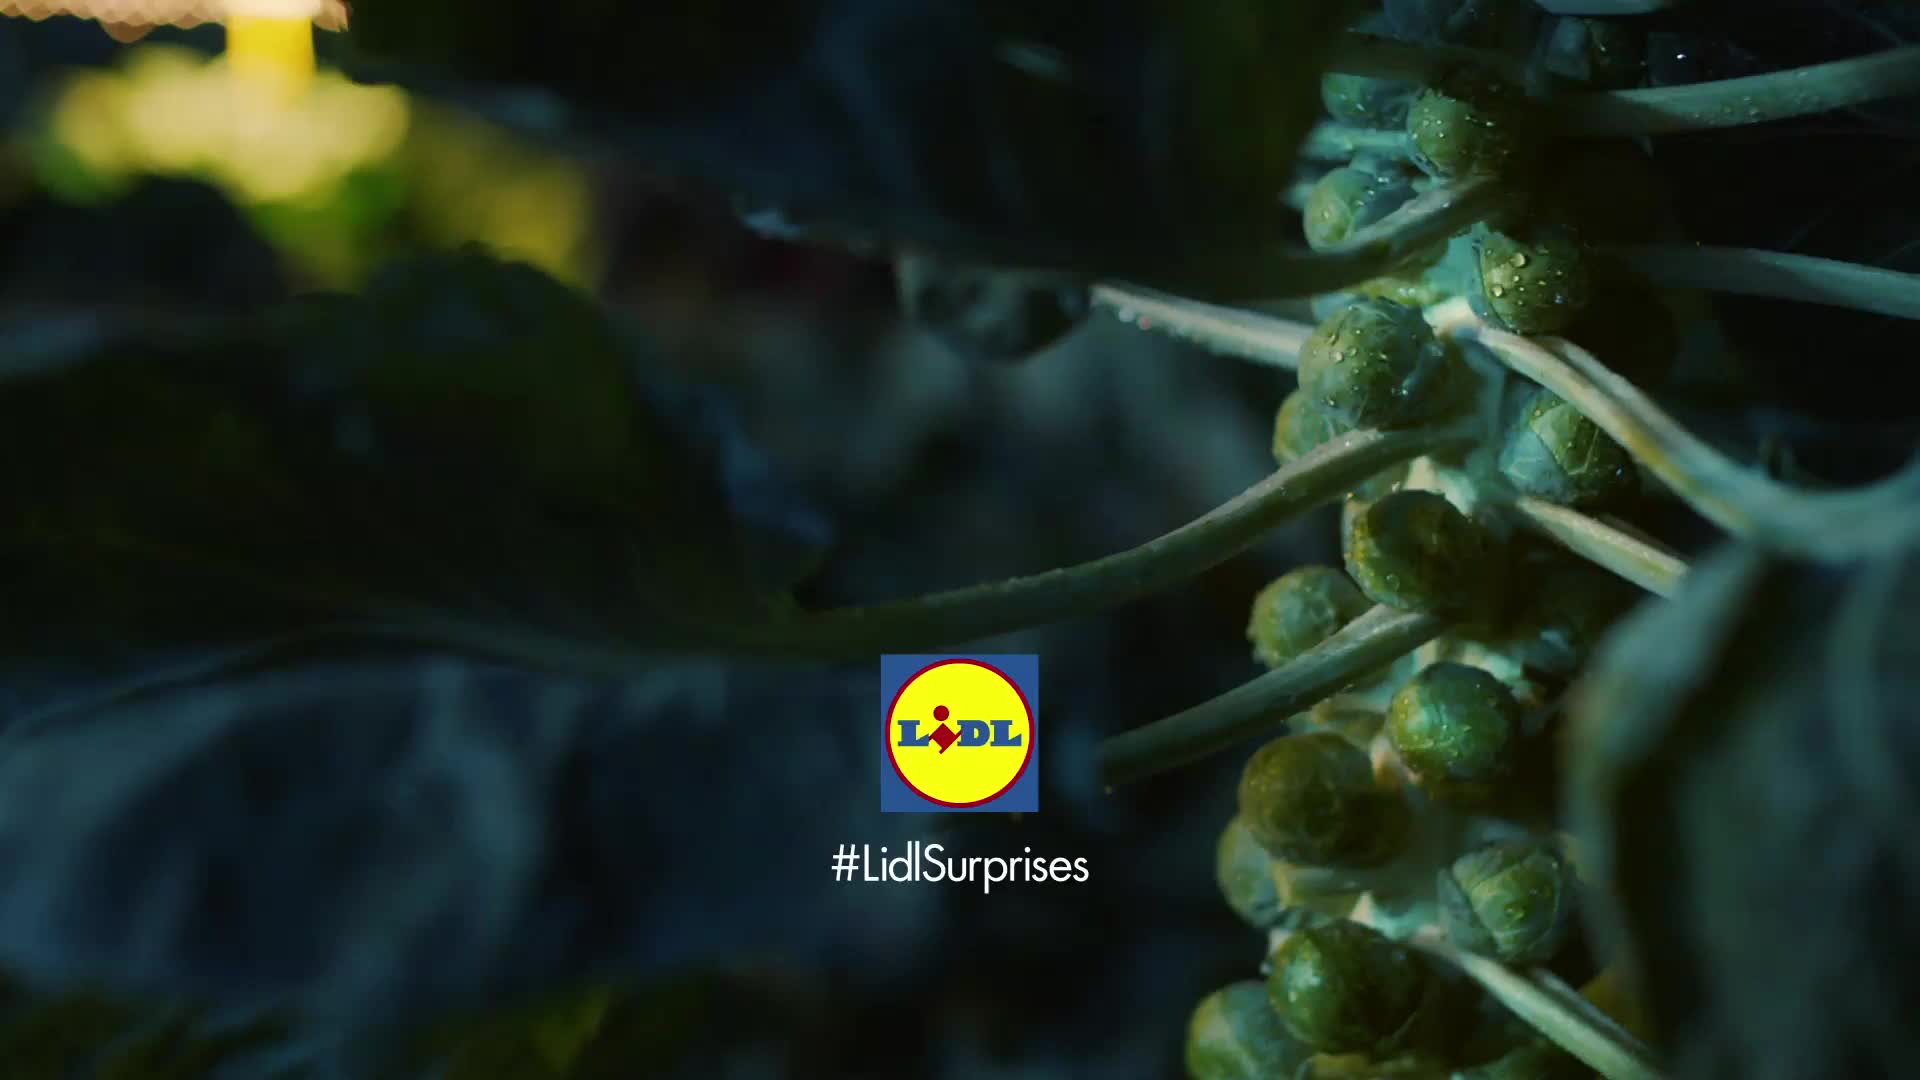 Lidl; Brussel Sprouts